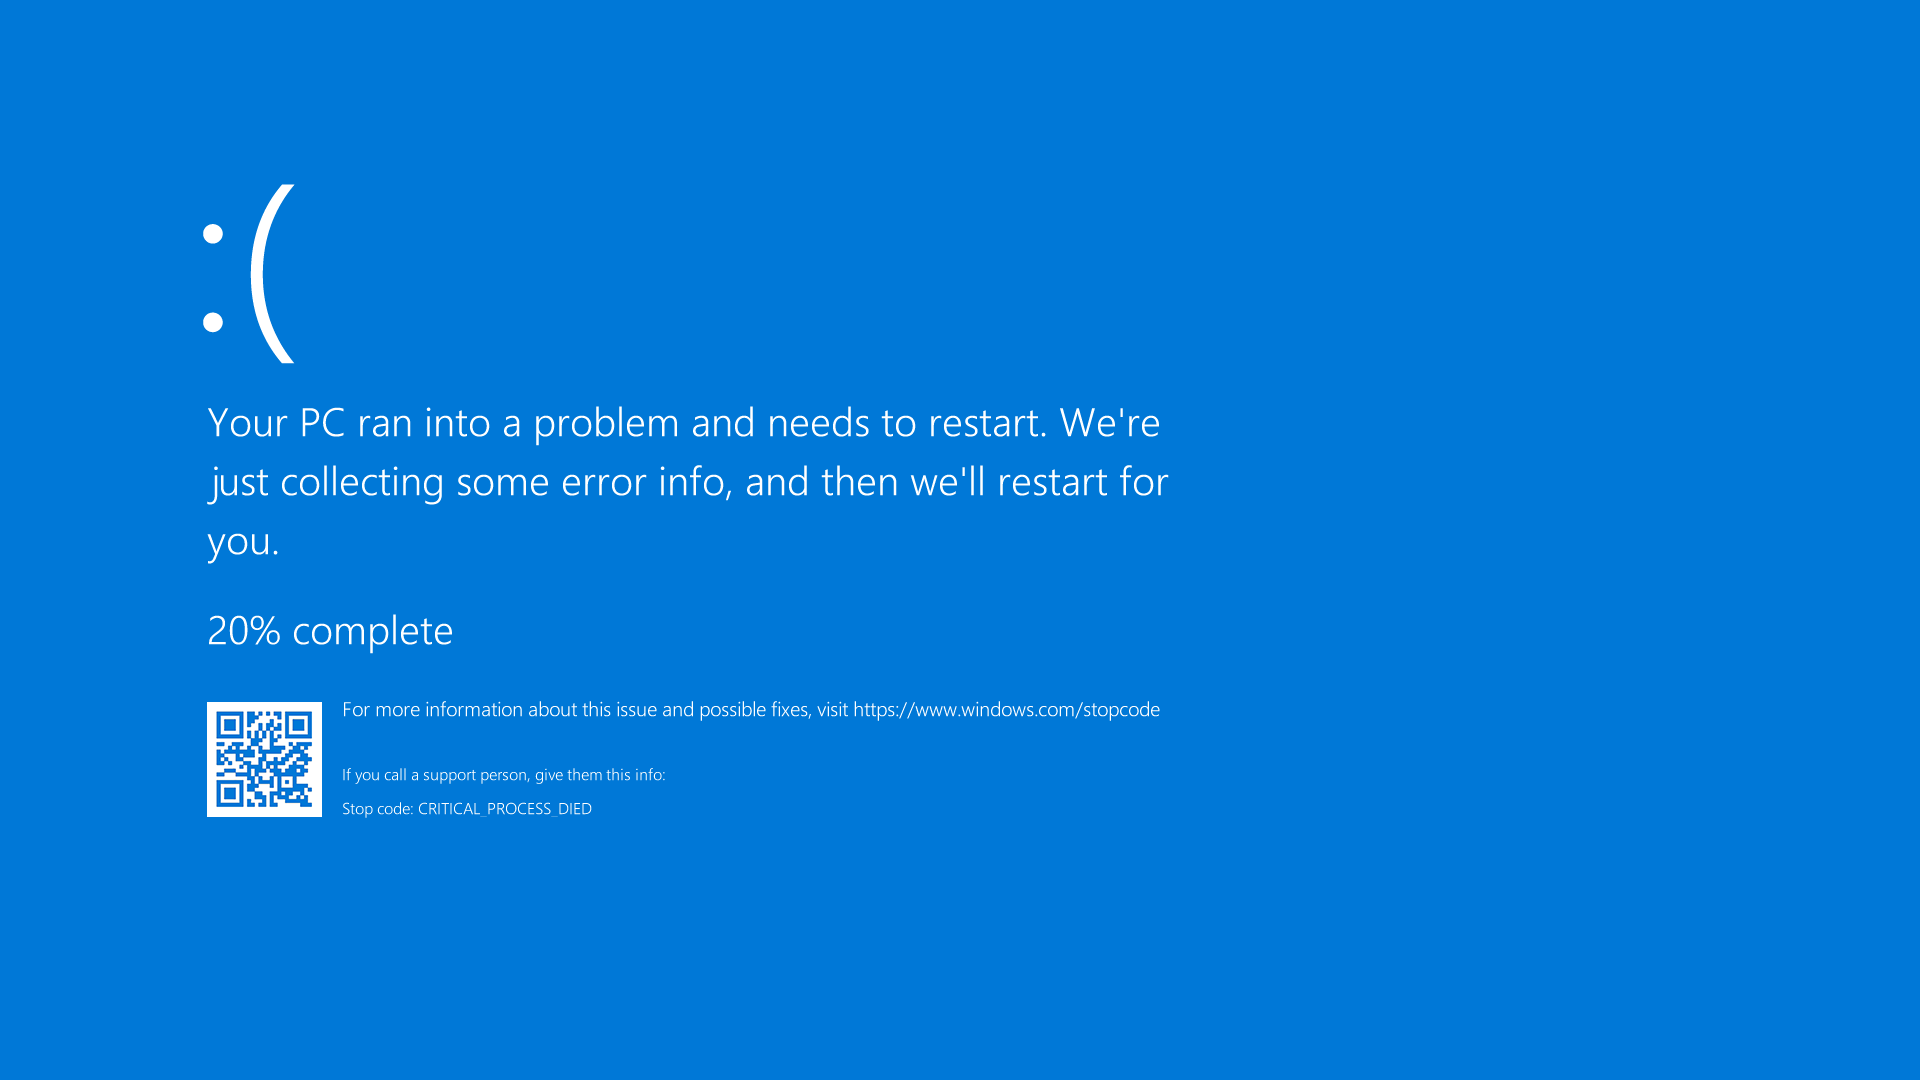 How to Blue Screen Windows 10?